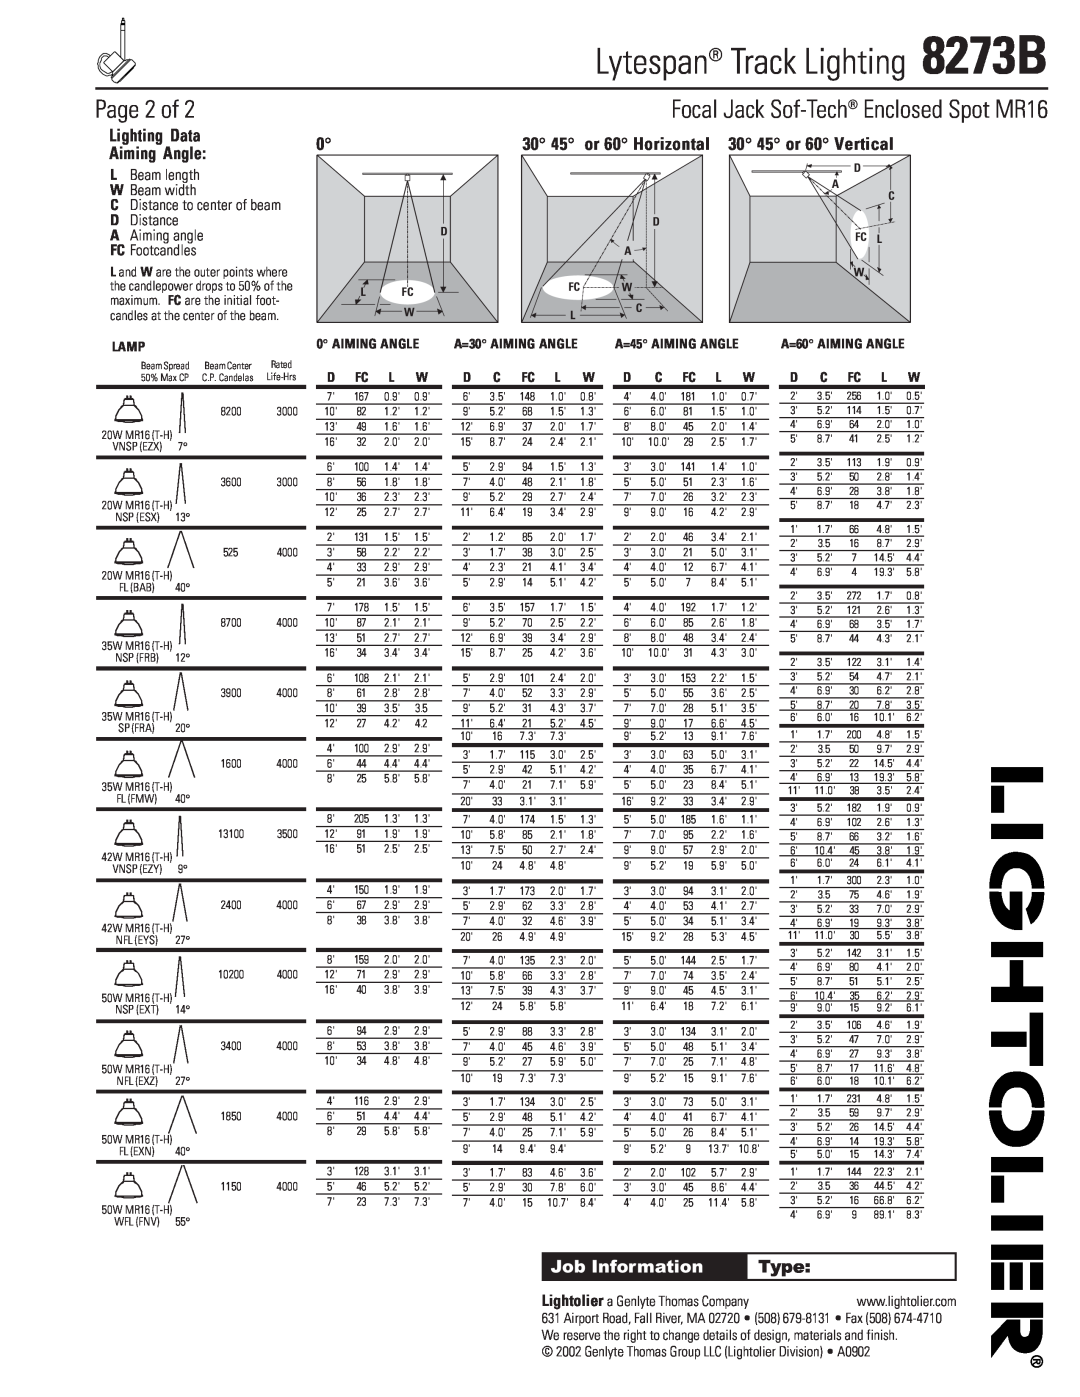 Lightolier 8273B Page 2 of, Focal Jack Sof-Tech Enclosed Spot MR16, 30 45 or 60 Horizontal 30 45 or 60 Vertical, Type 